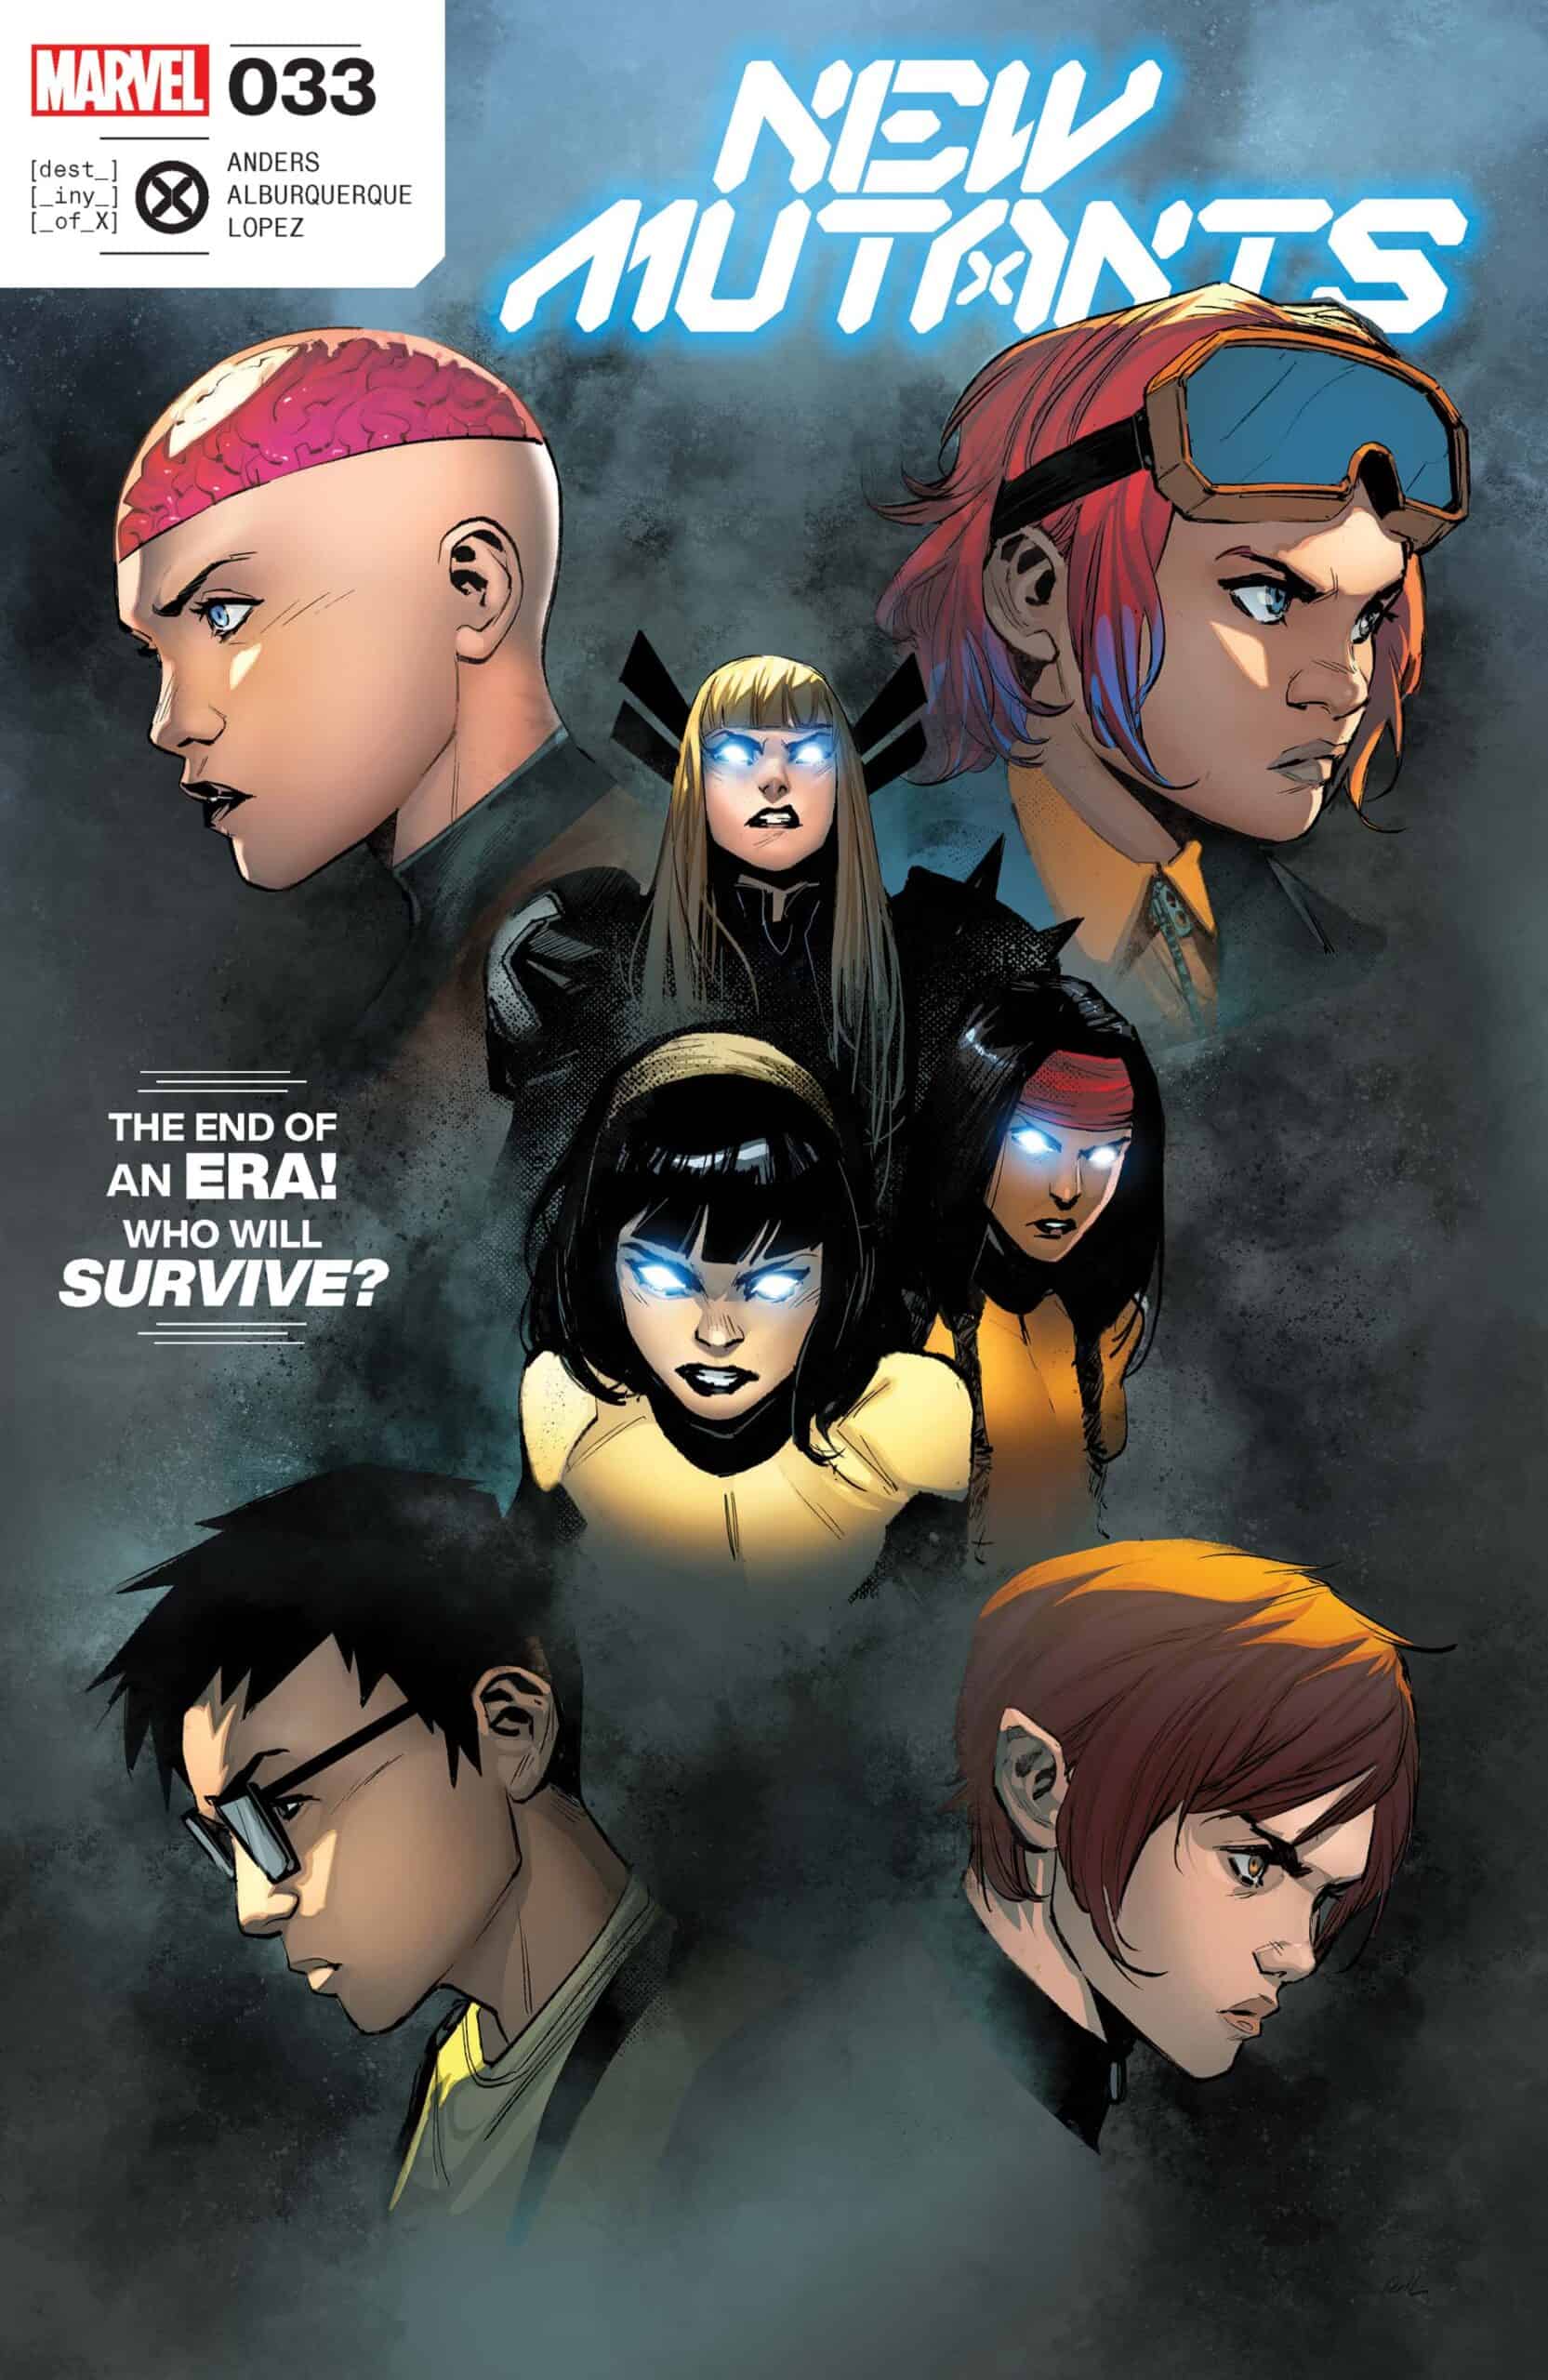 Better late than never review: The New Mutants